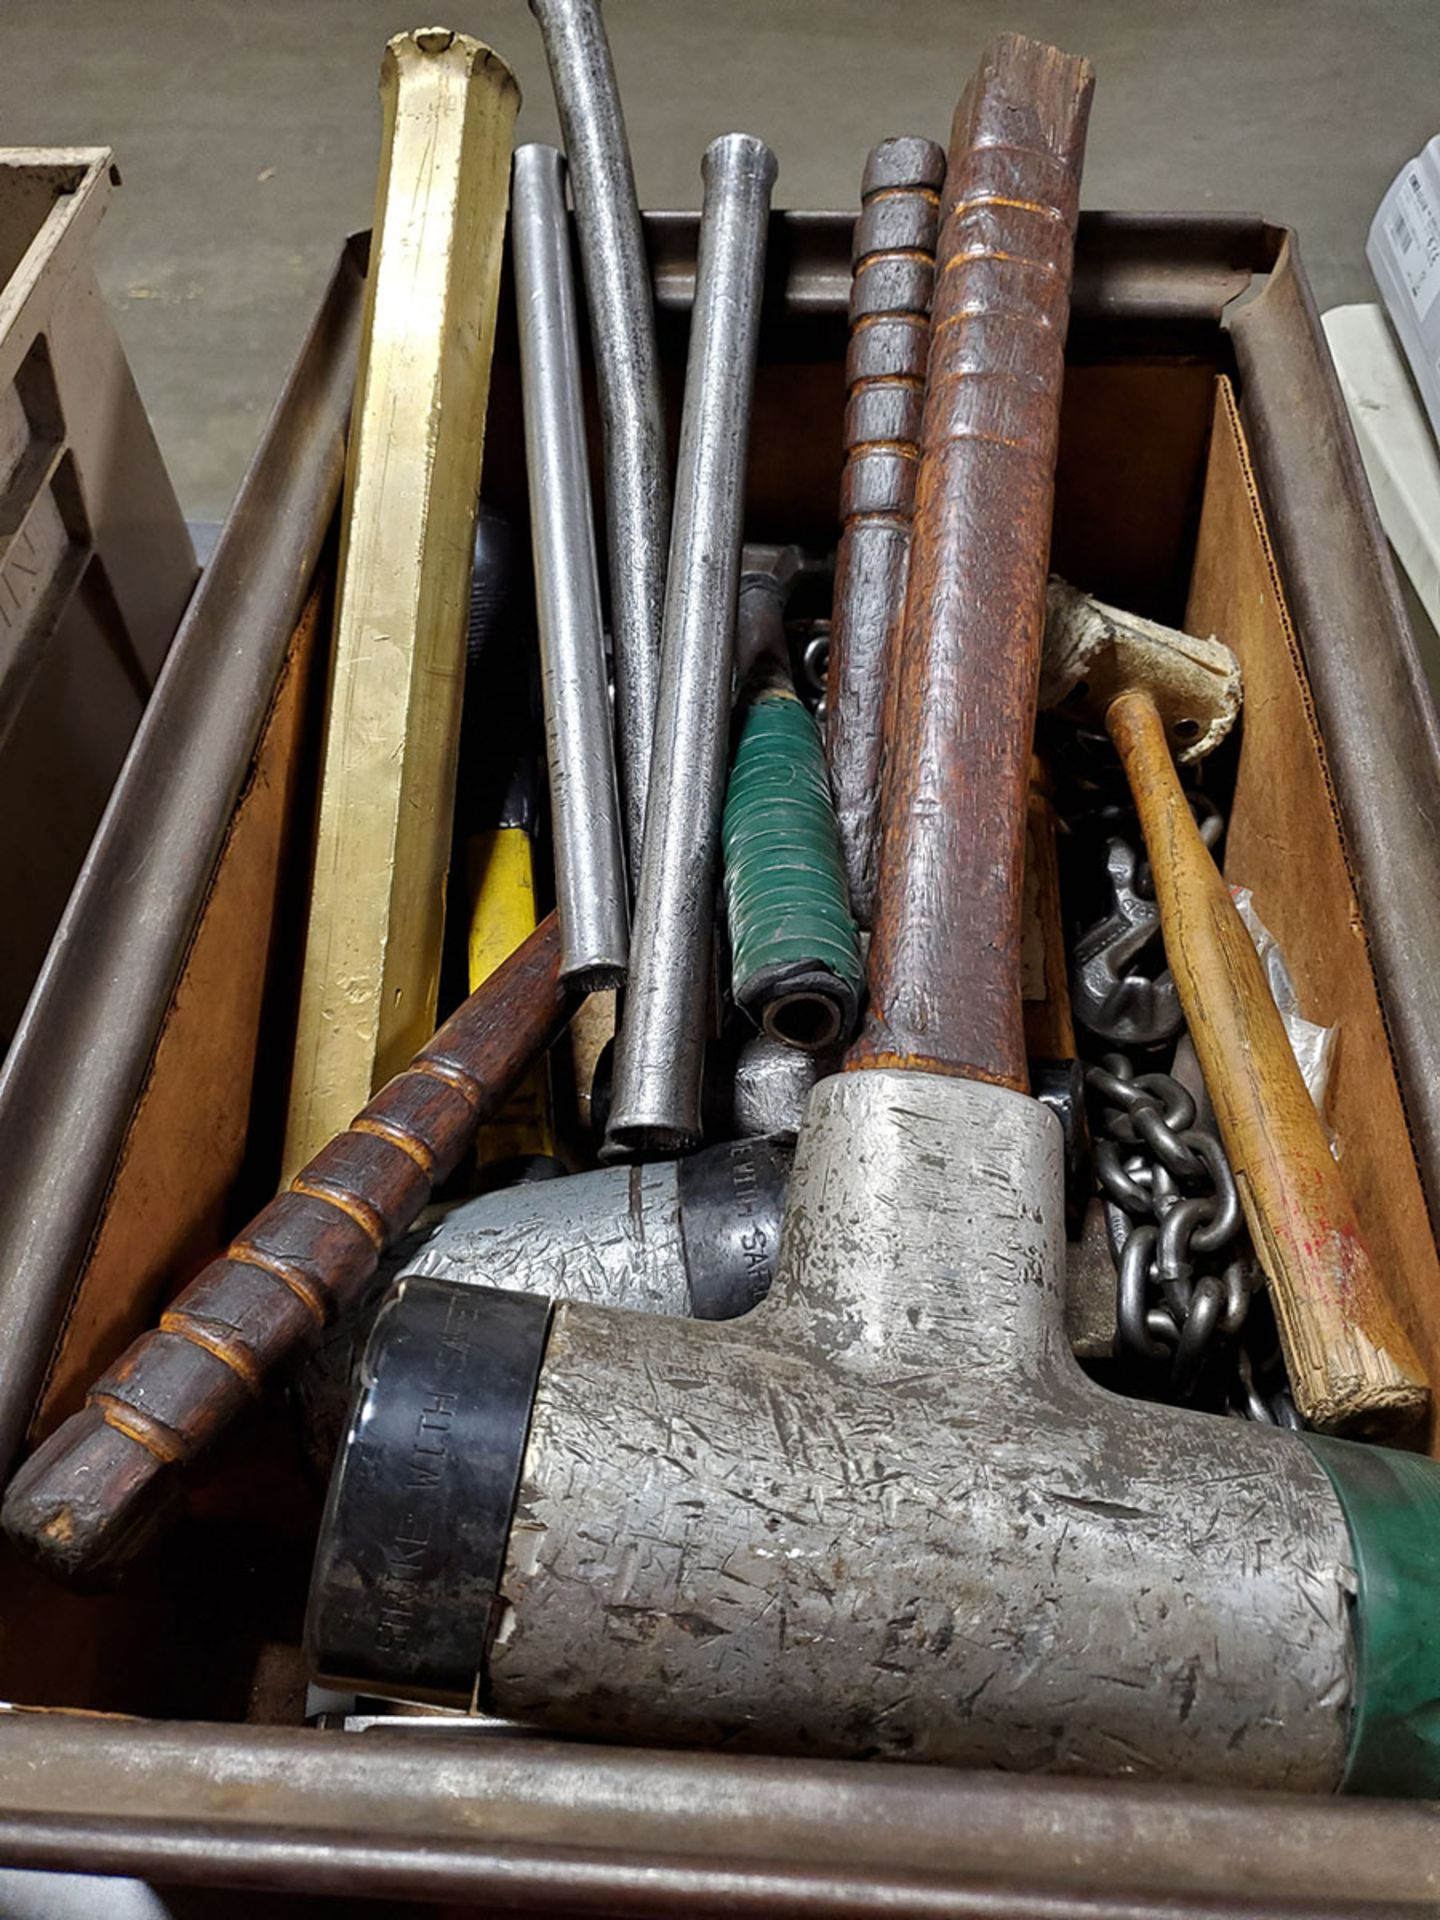 LOT OF ASSORTED MALLETS, HAMMERS, AND ANVIL